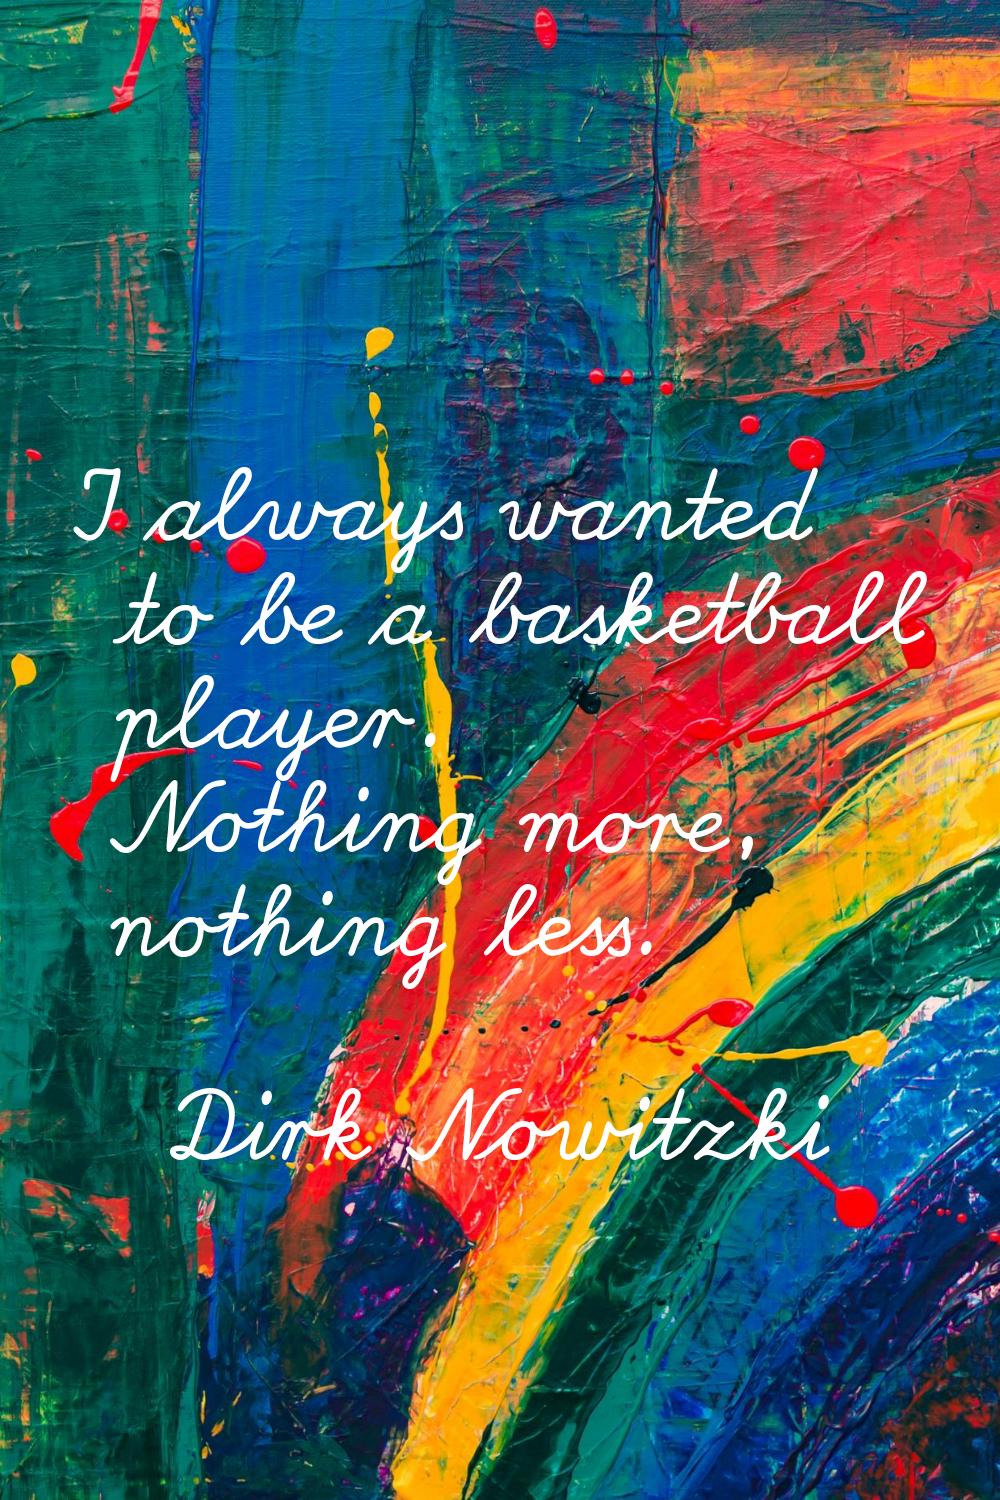 I always wanted to be a basketball player. Nothing more, nothing less.